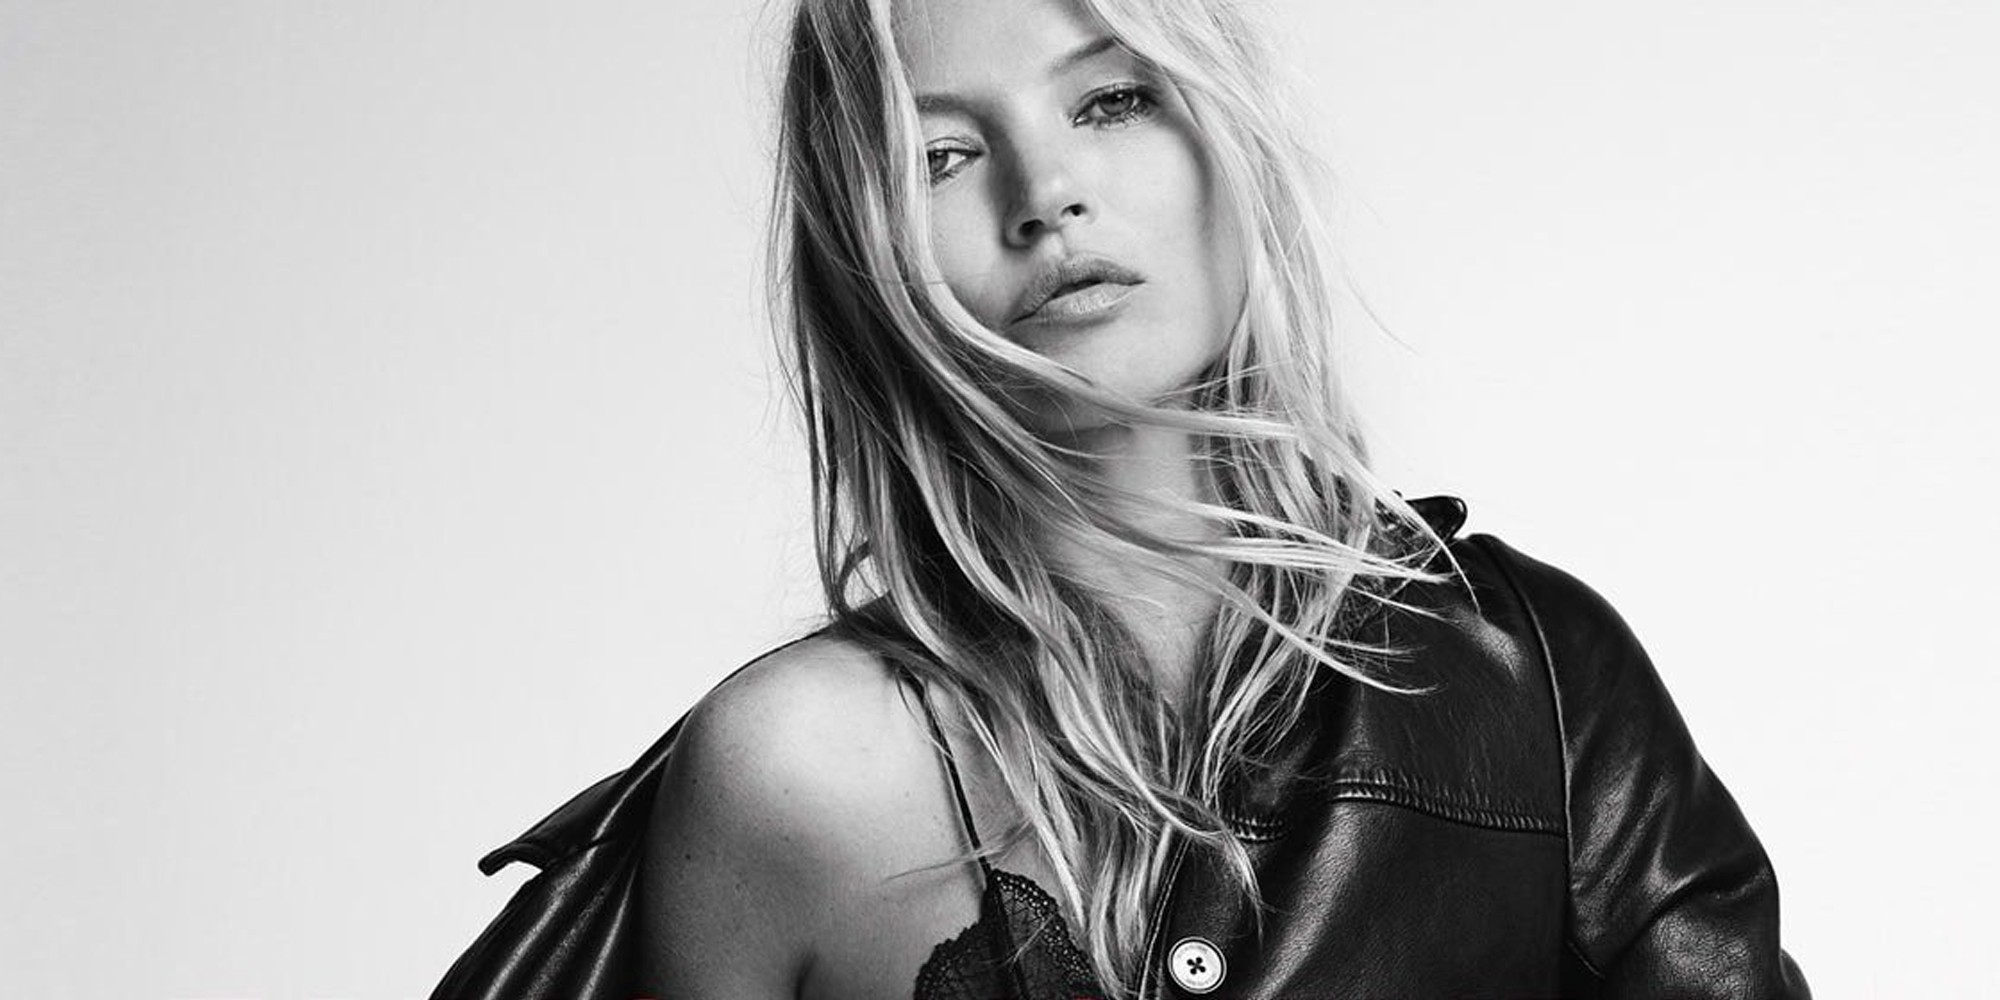 ZADIG & VOLTAIRE FALL 2019 CAMPAIGN FILM STARRING KATE MOSS